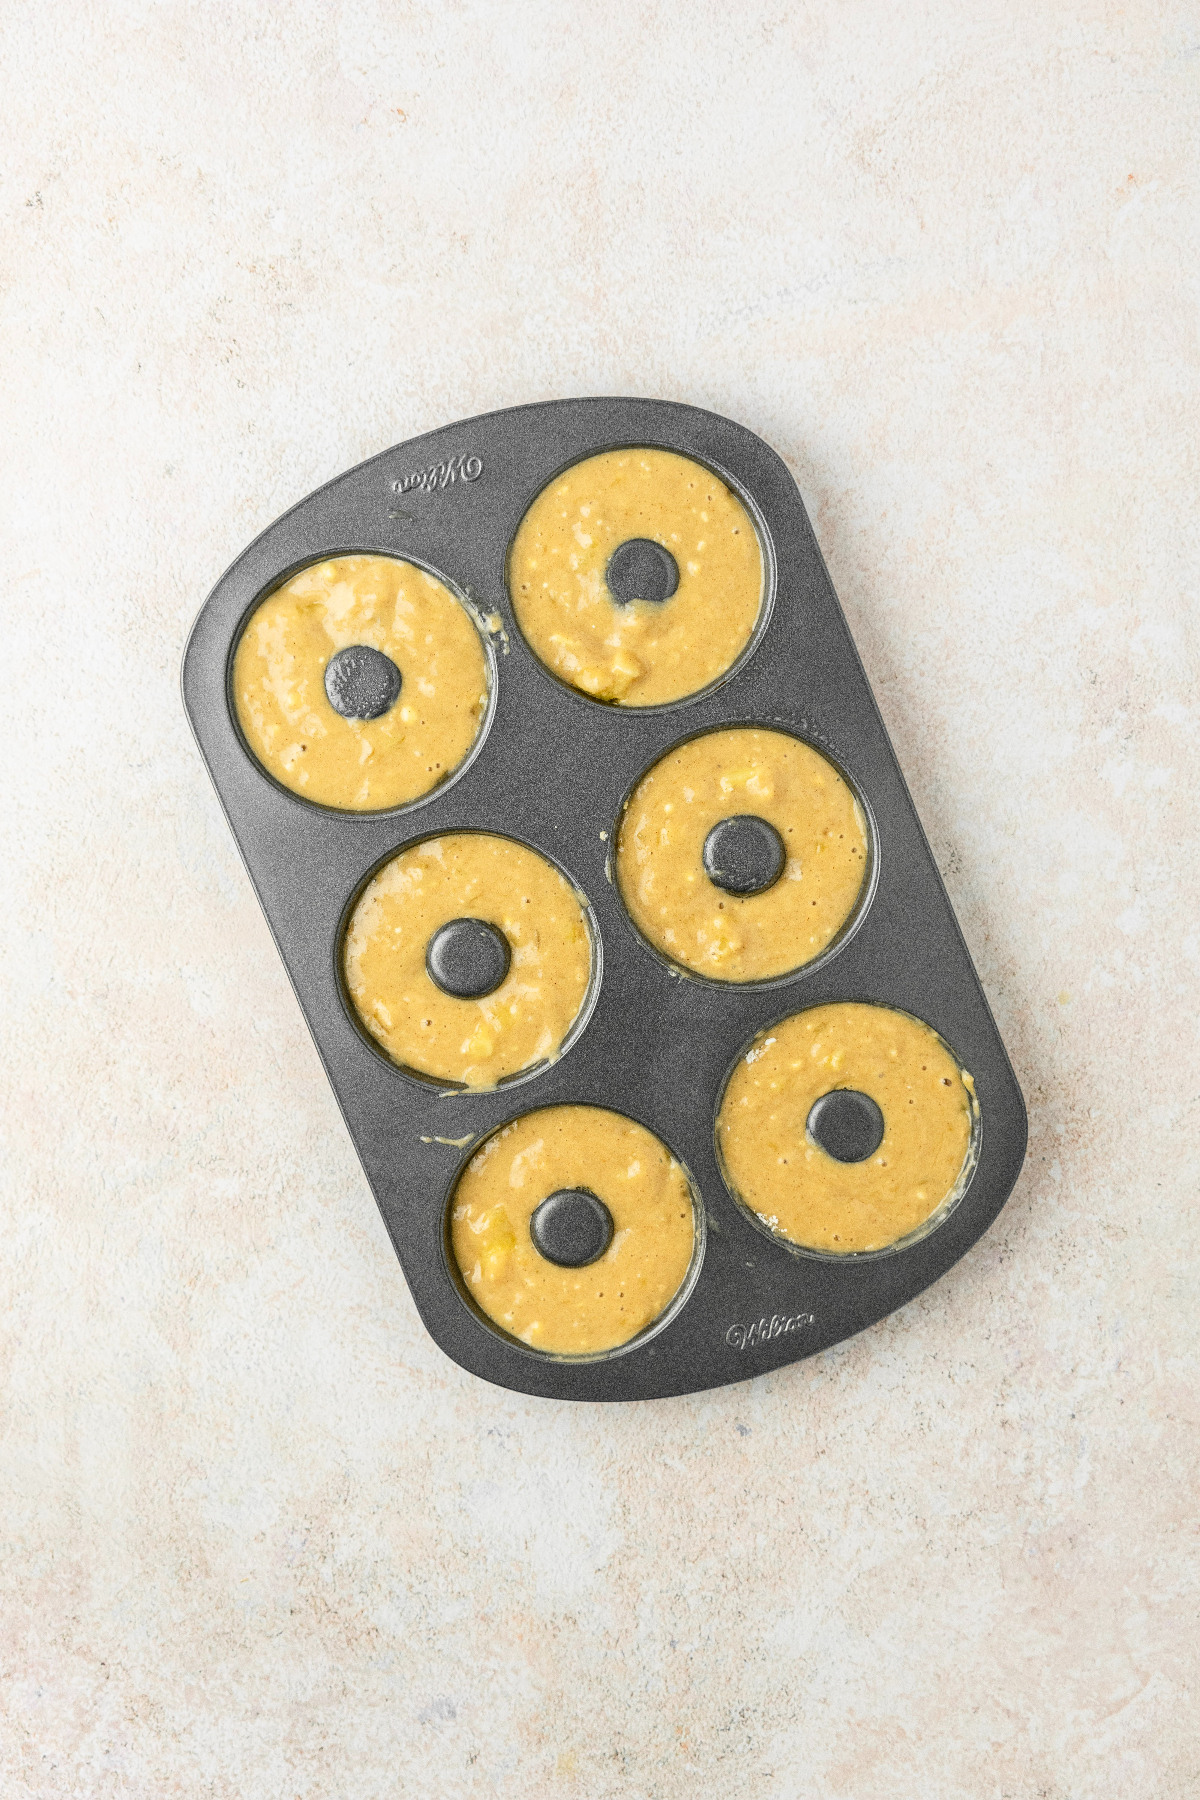 Donut pan filled with batter and ready to bake.